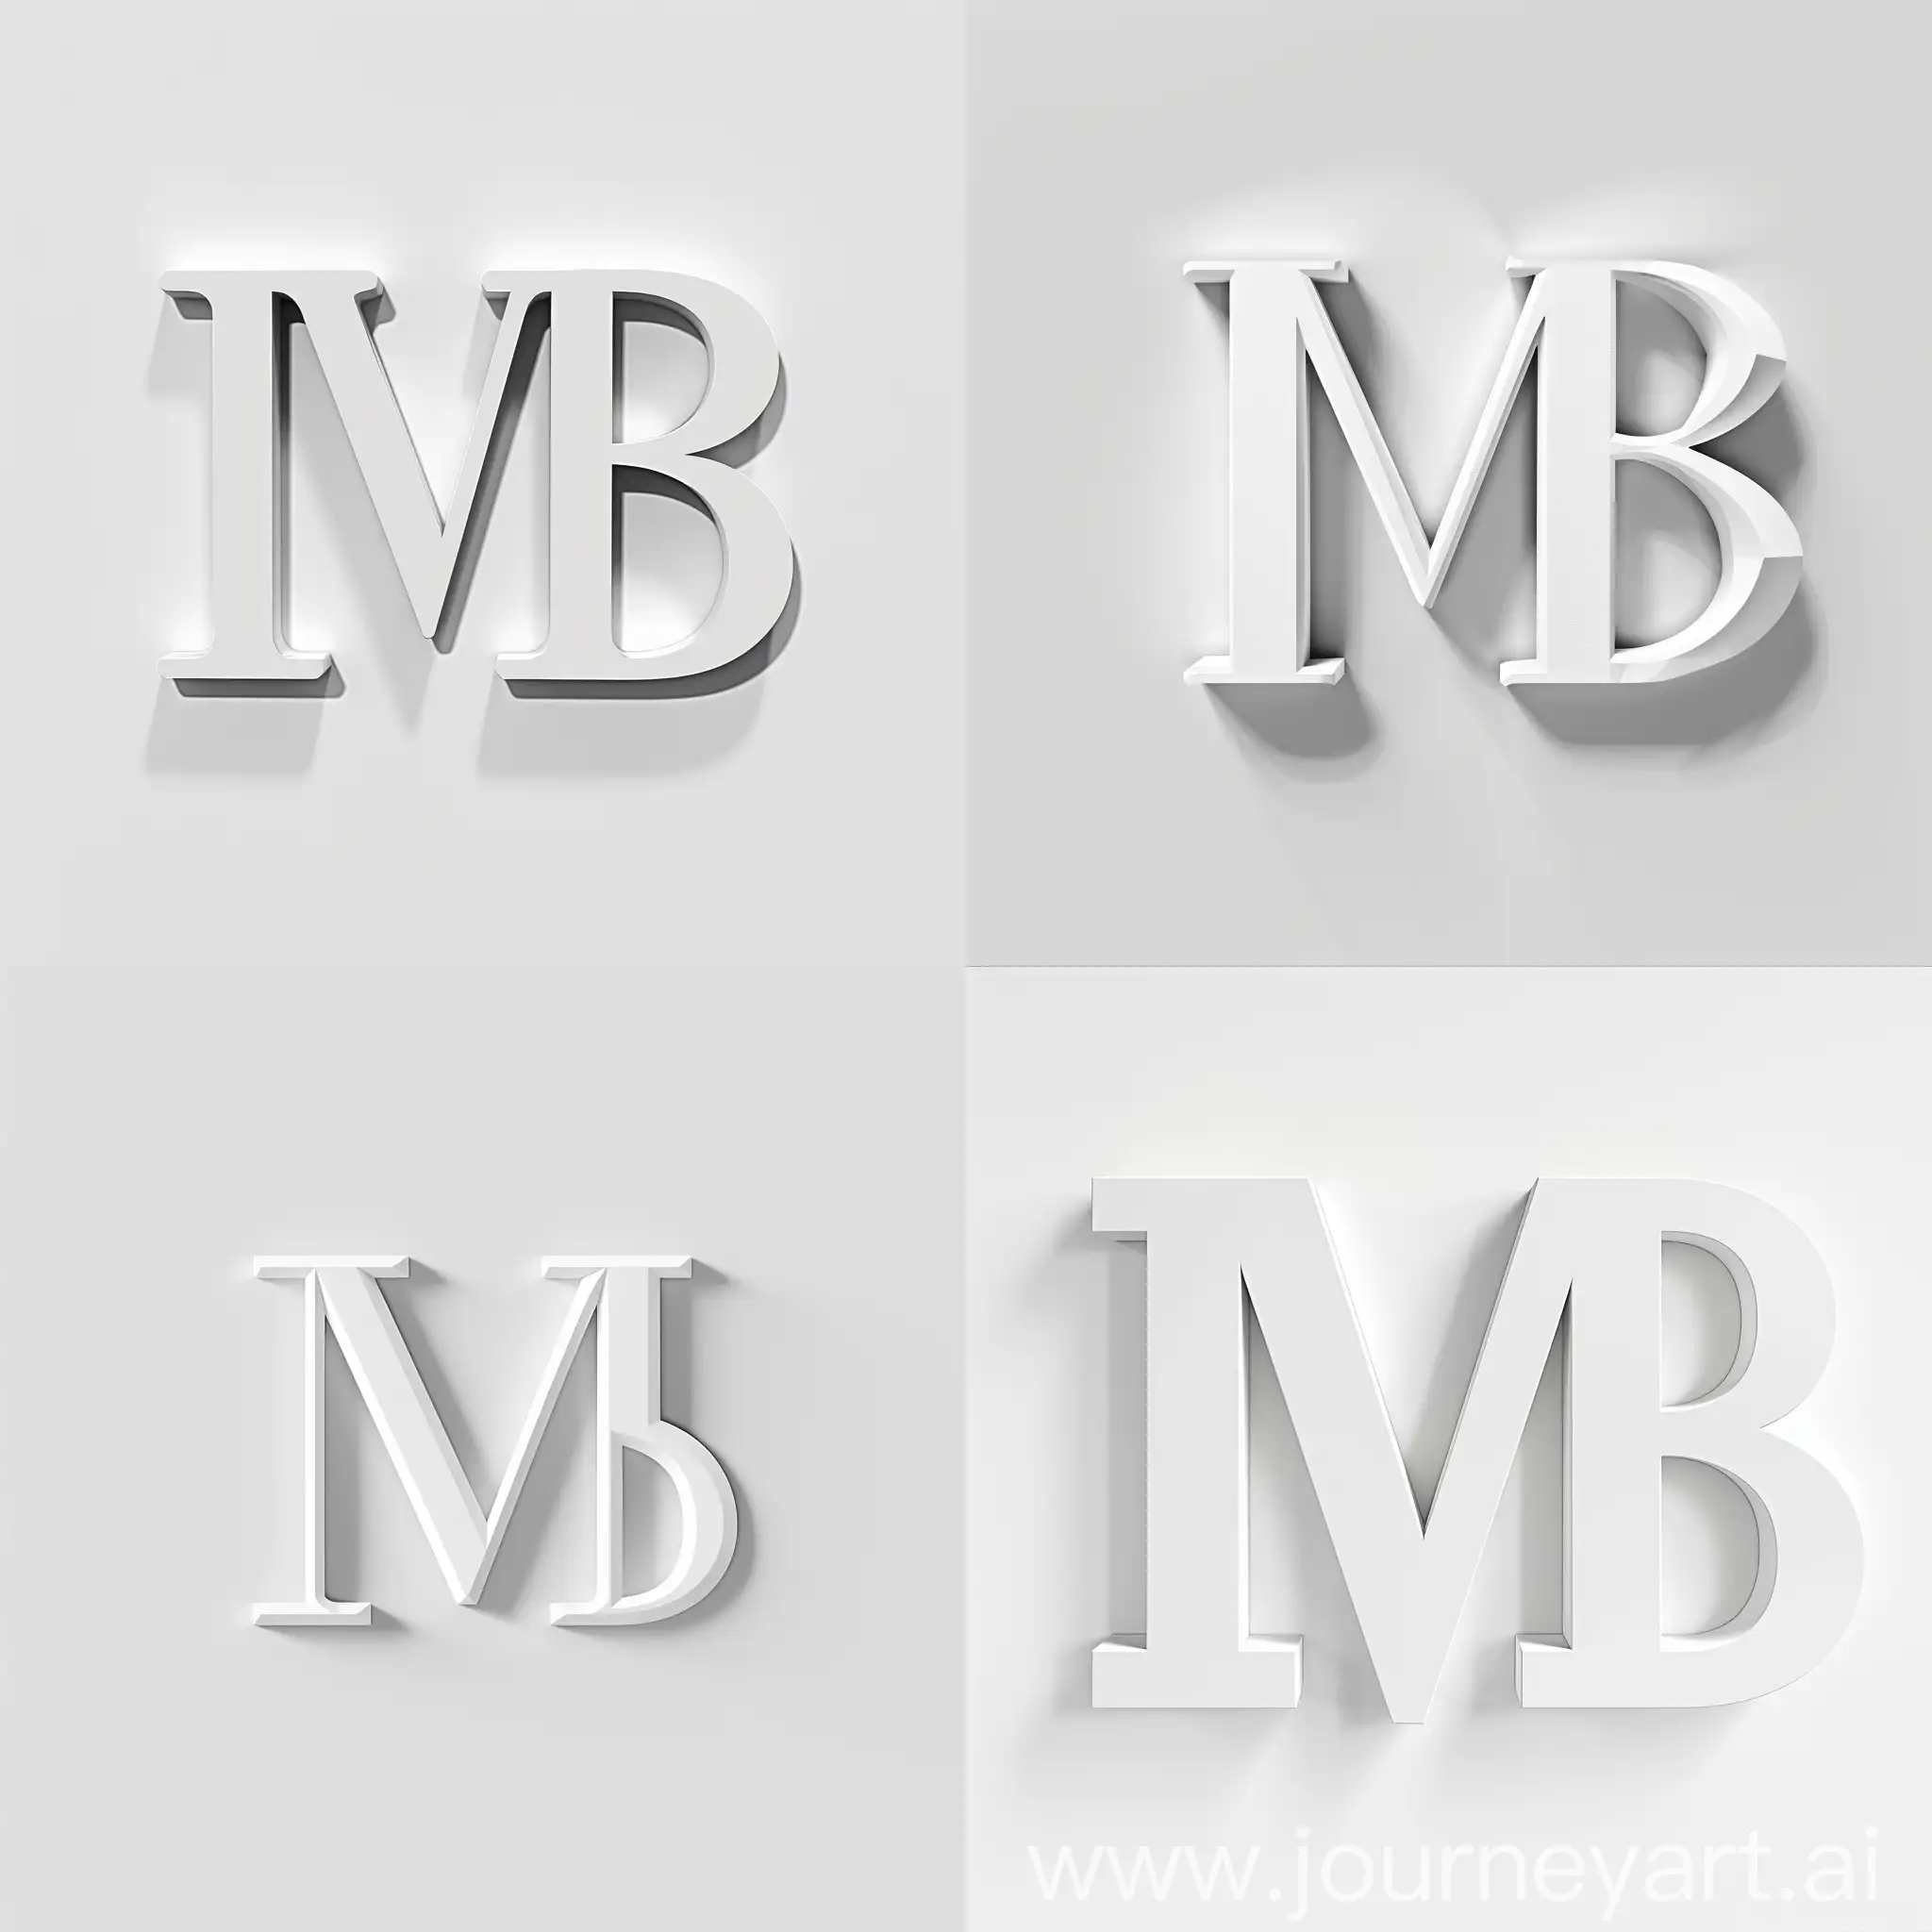 create a 2d  logo with letter "MB" white background